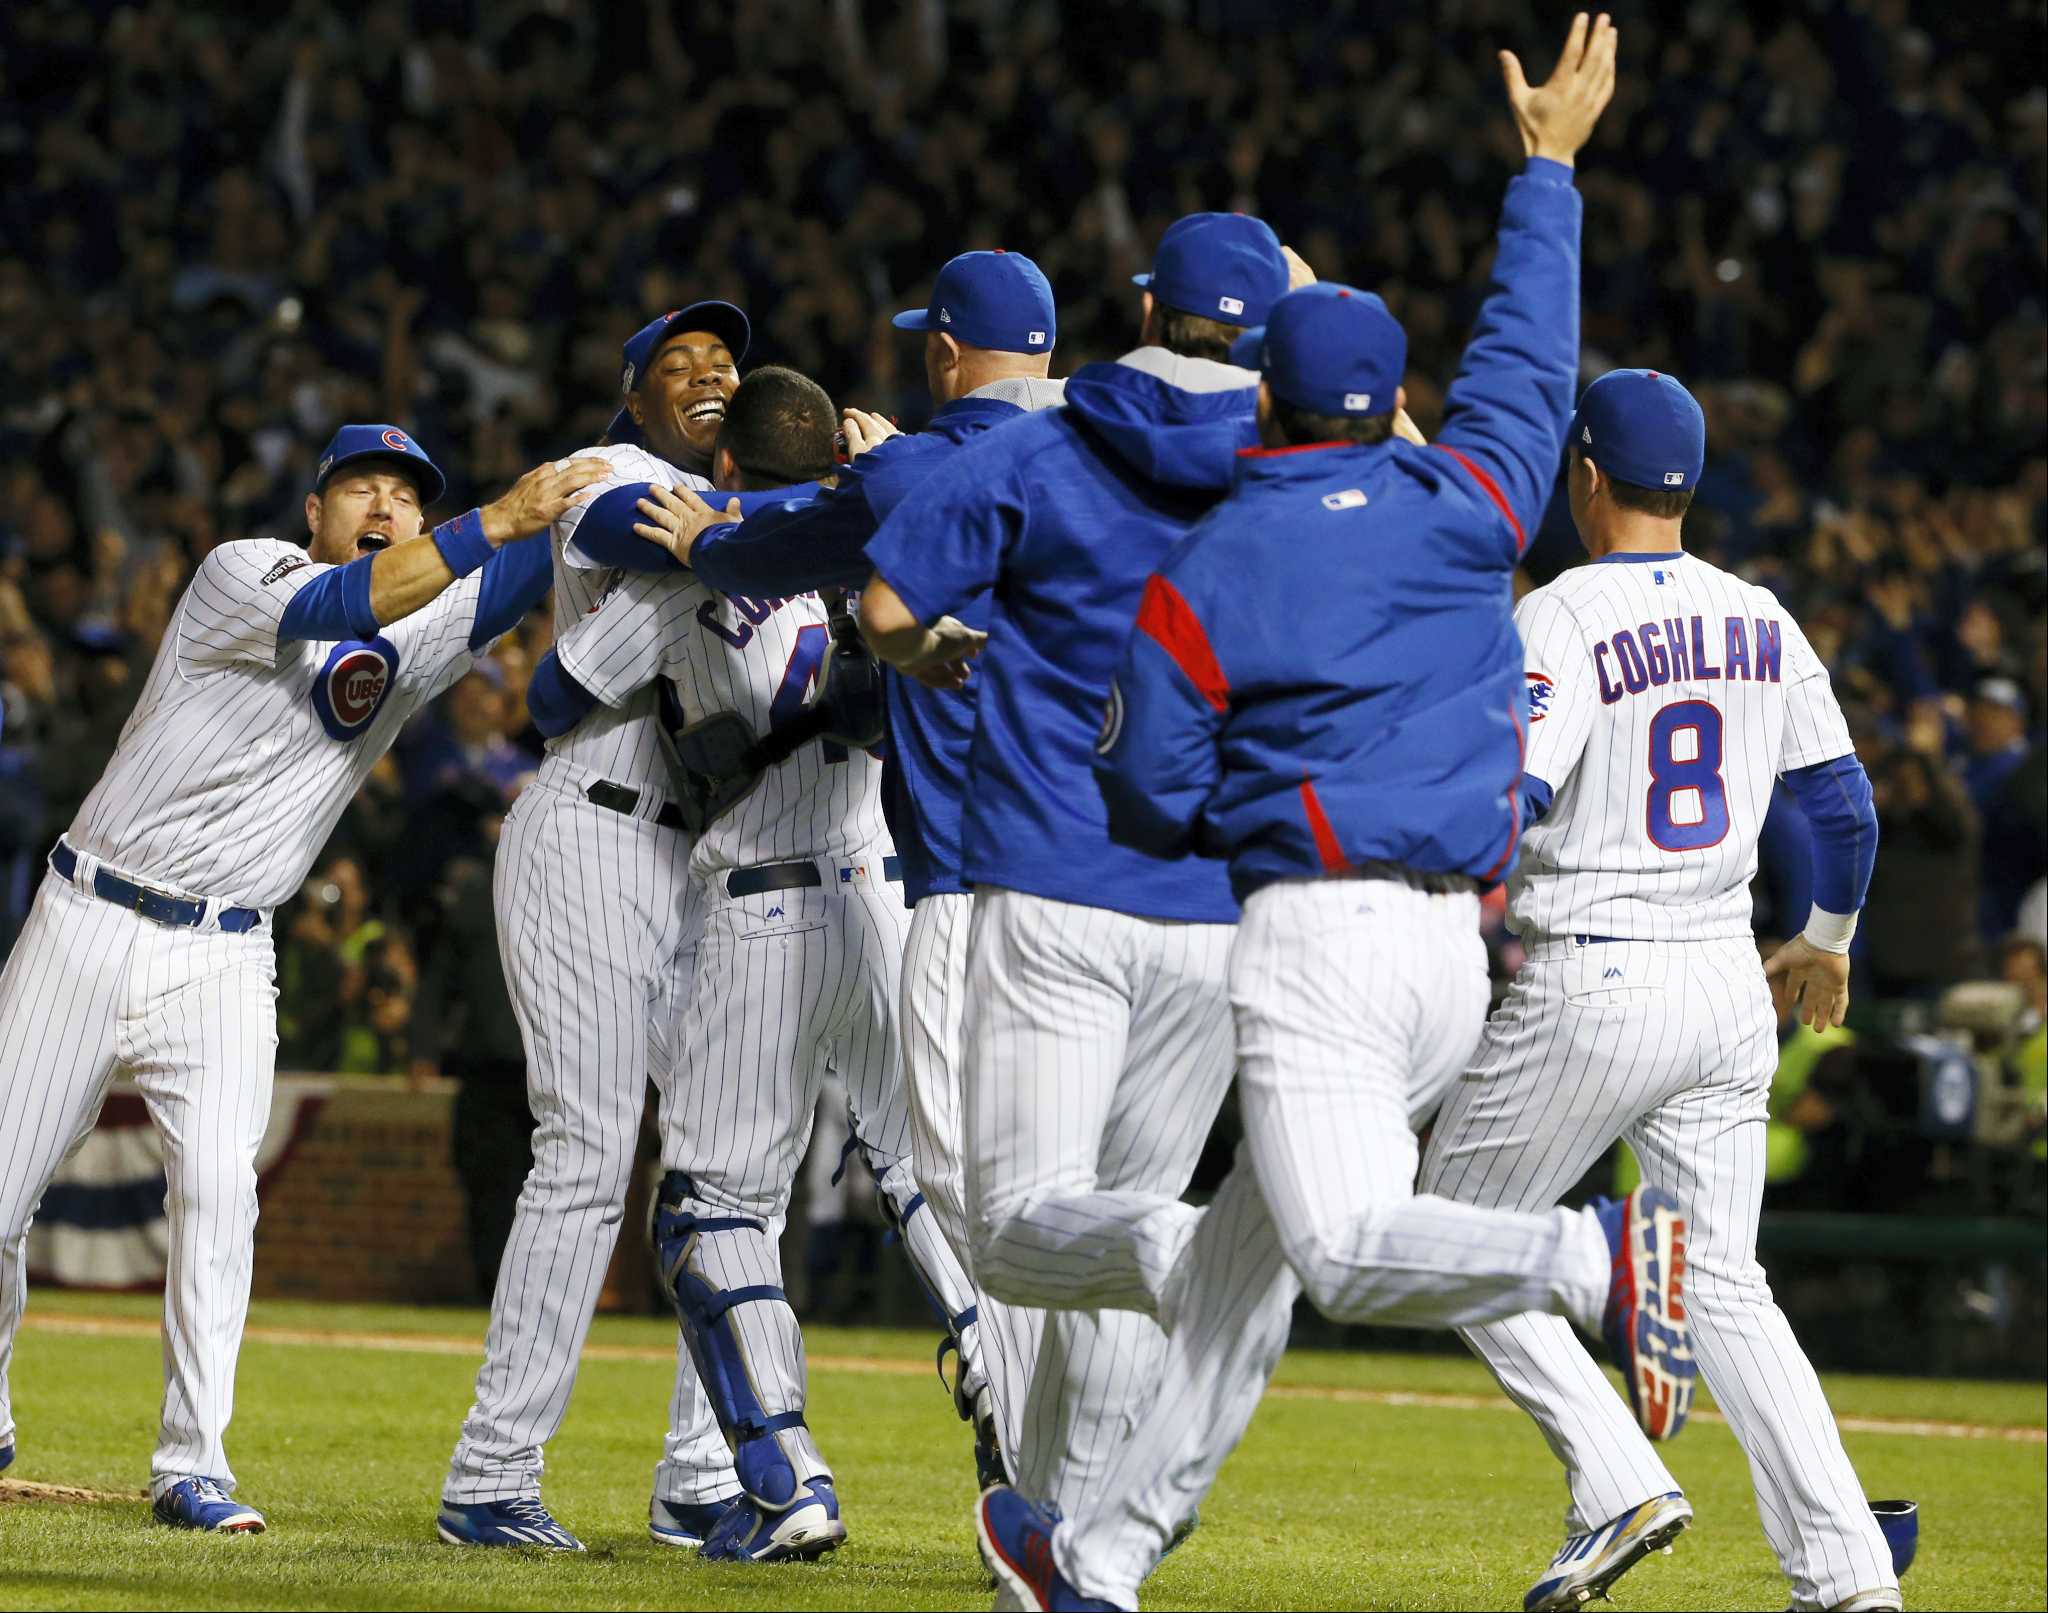 Watch the out that clinched the Cubs' 1st World Series since 1908 